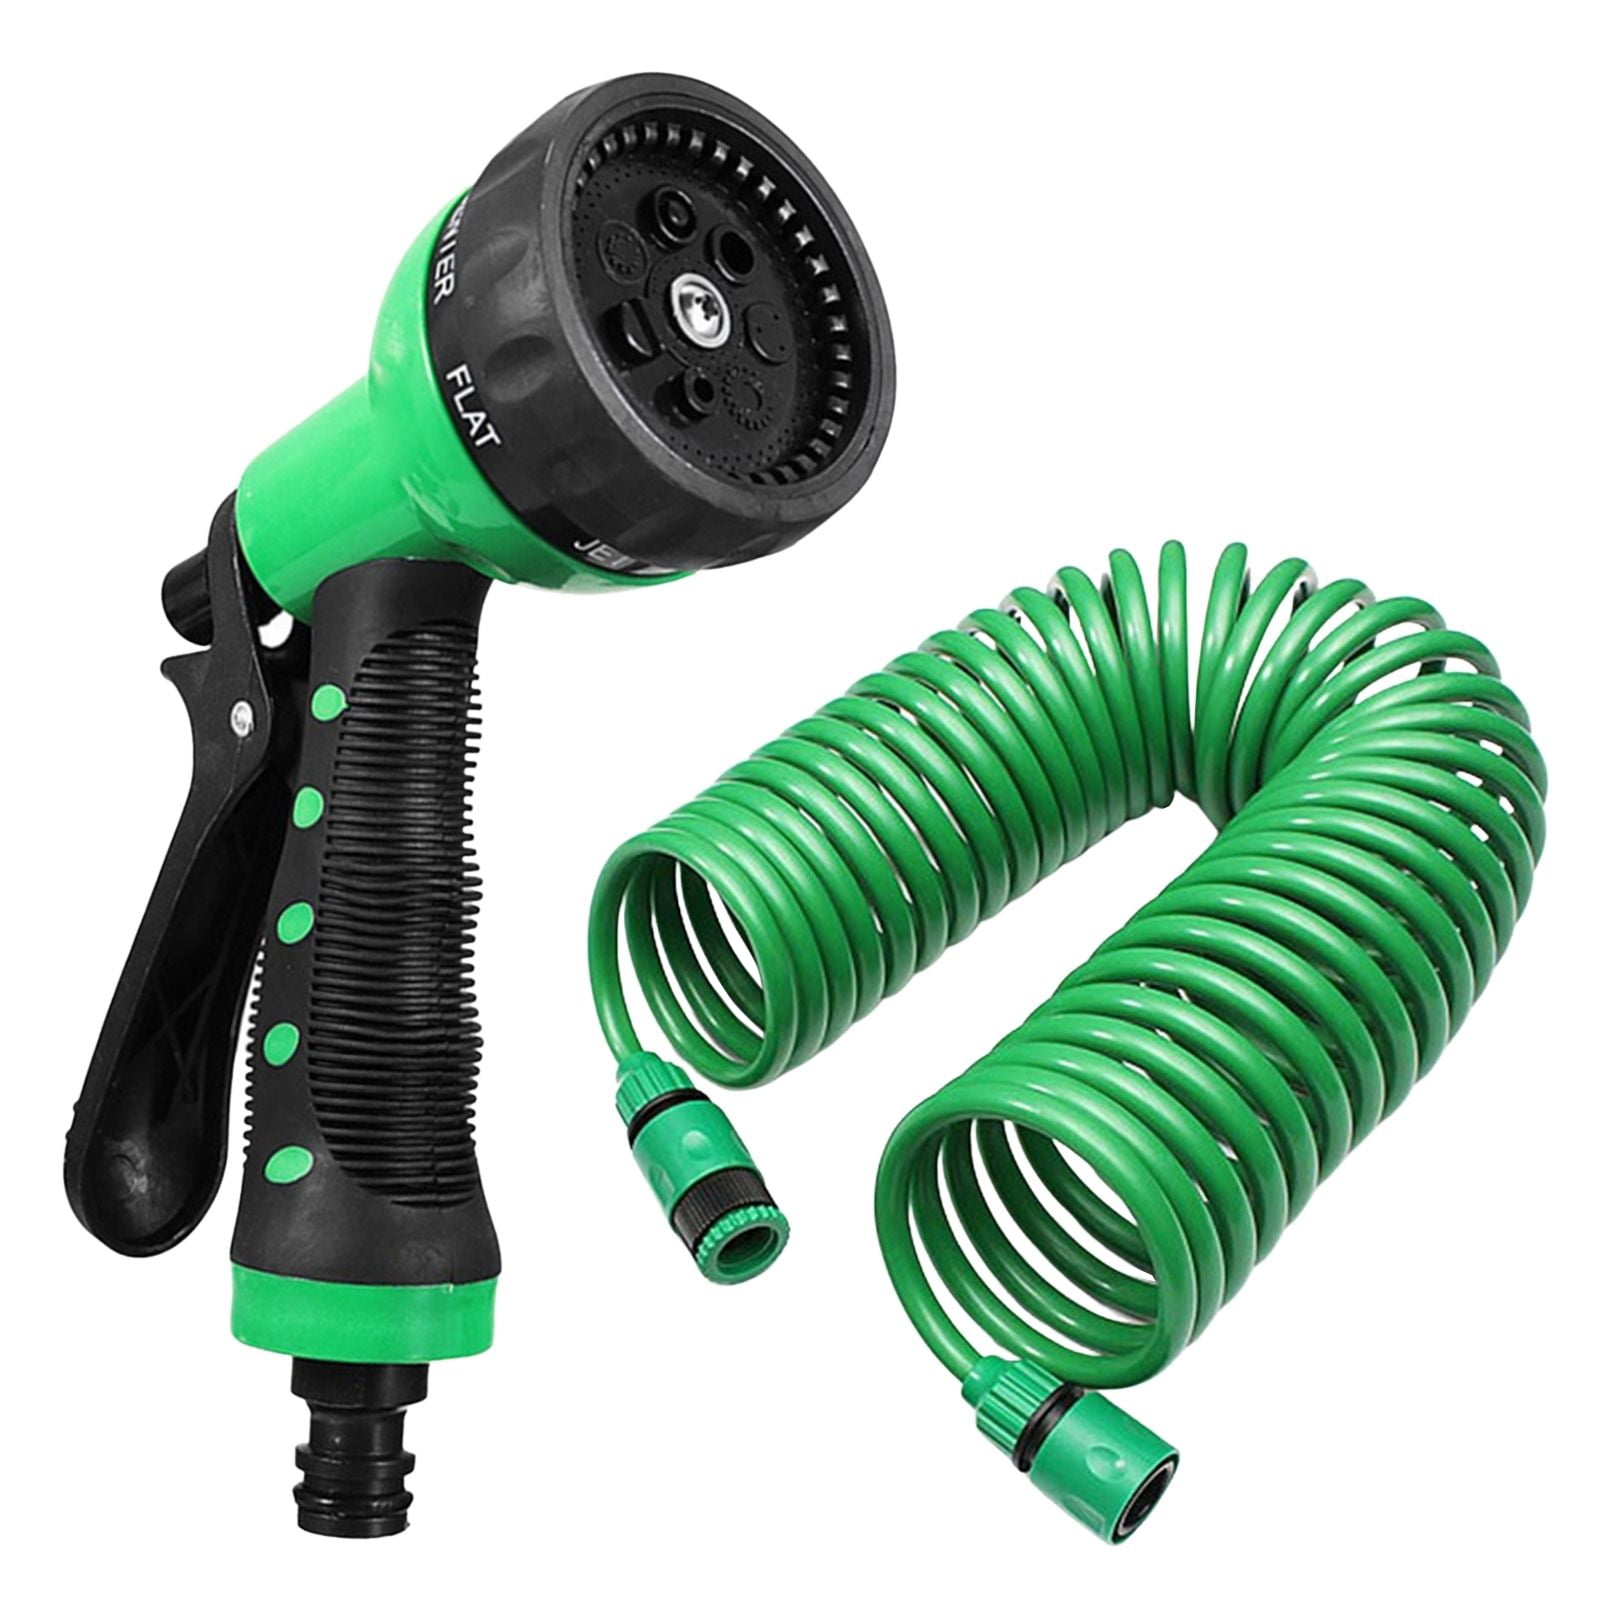 26 Inches Garden Hose Nozzle Sprayer,with 10 Adjustable Spray Patterns,and Thumb Control Shut Off Valve for Lawn and Garden Use FAKEME Watering Wand 